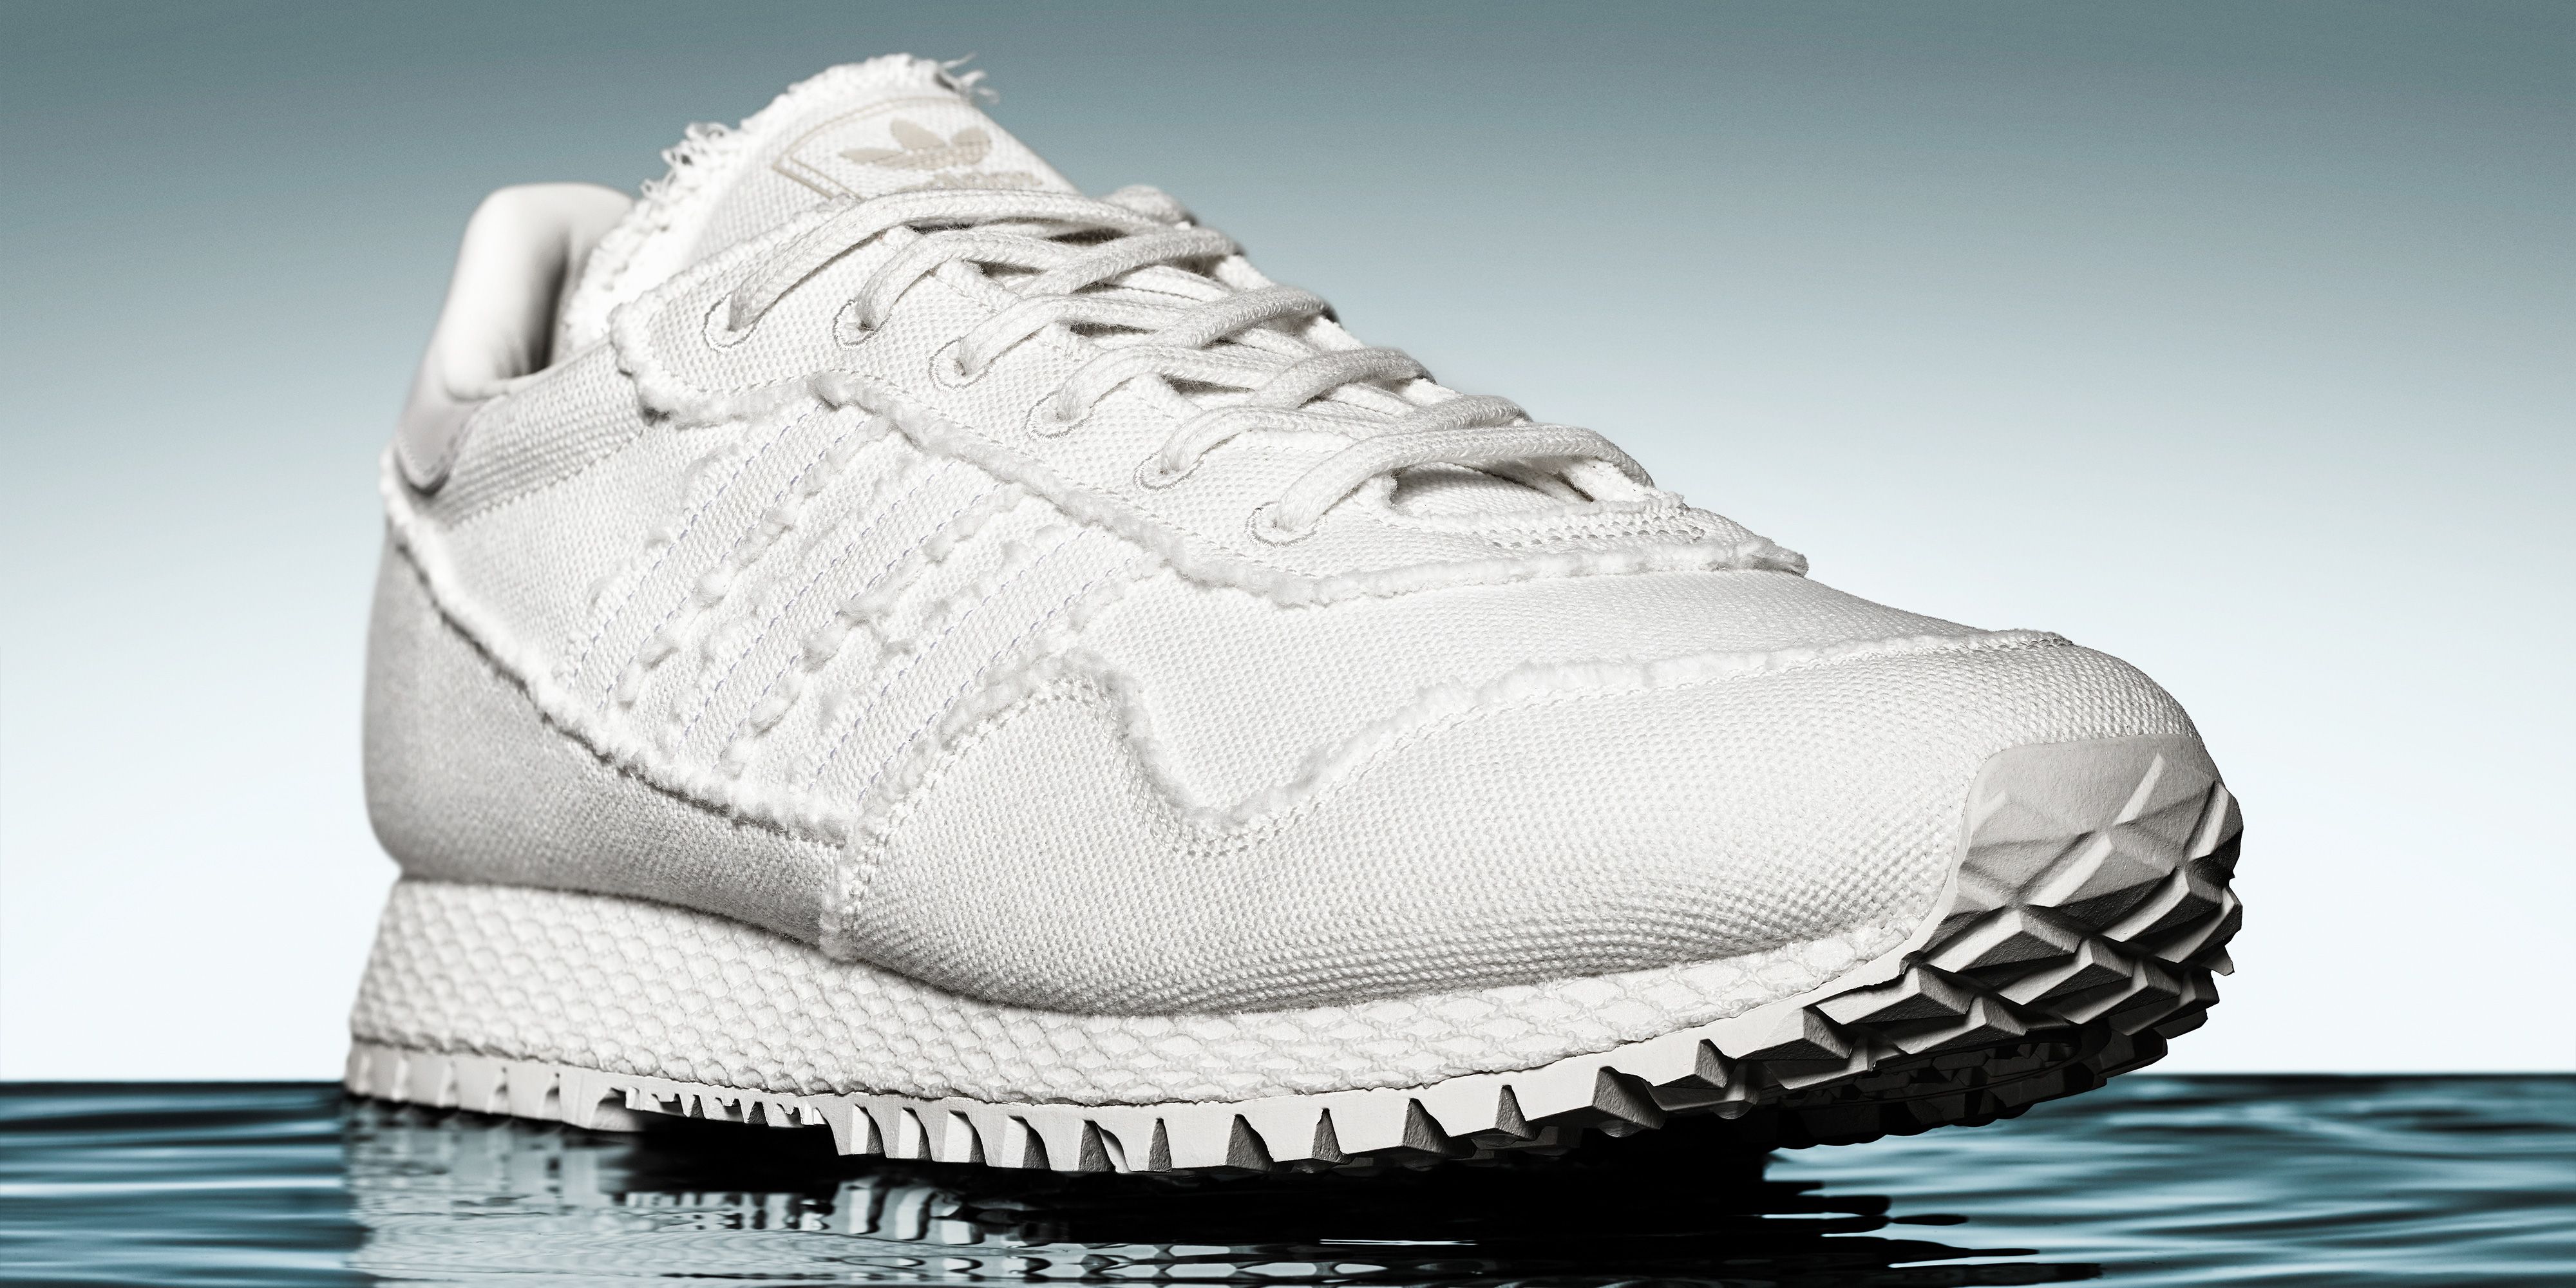 Adidas and Daniel Arsham's Cool New Might Give You an Existential Crisis